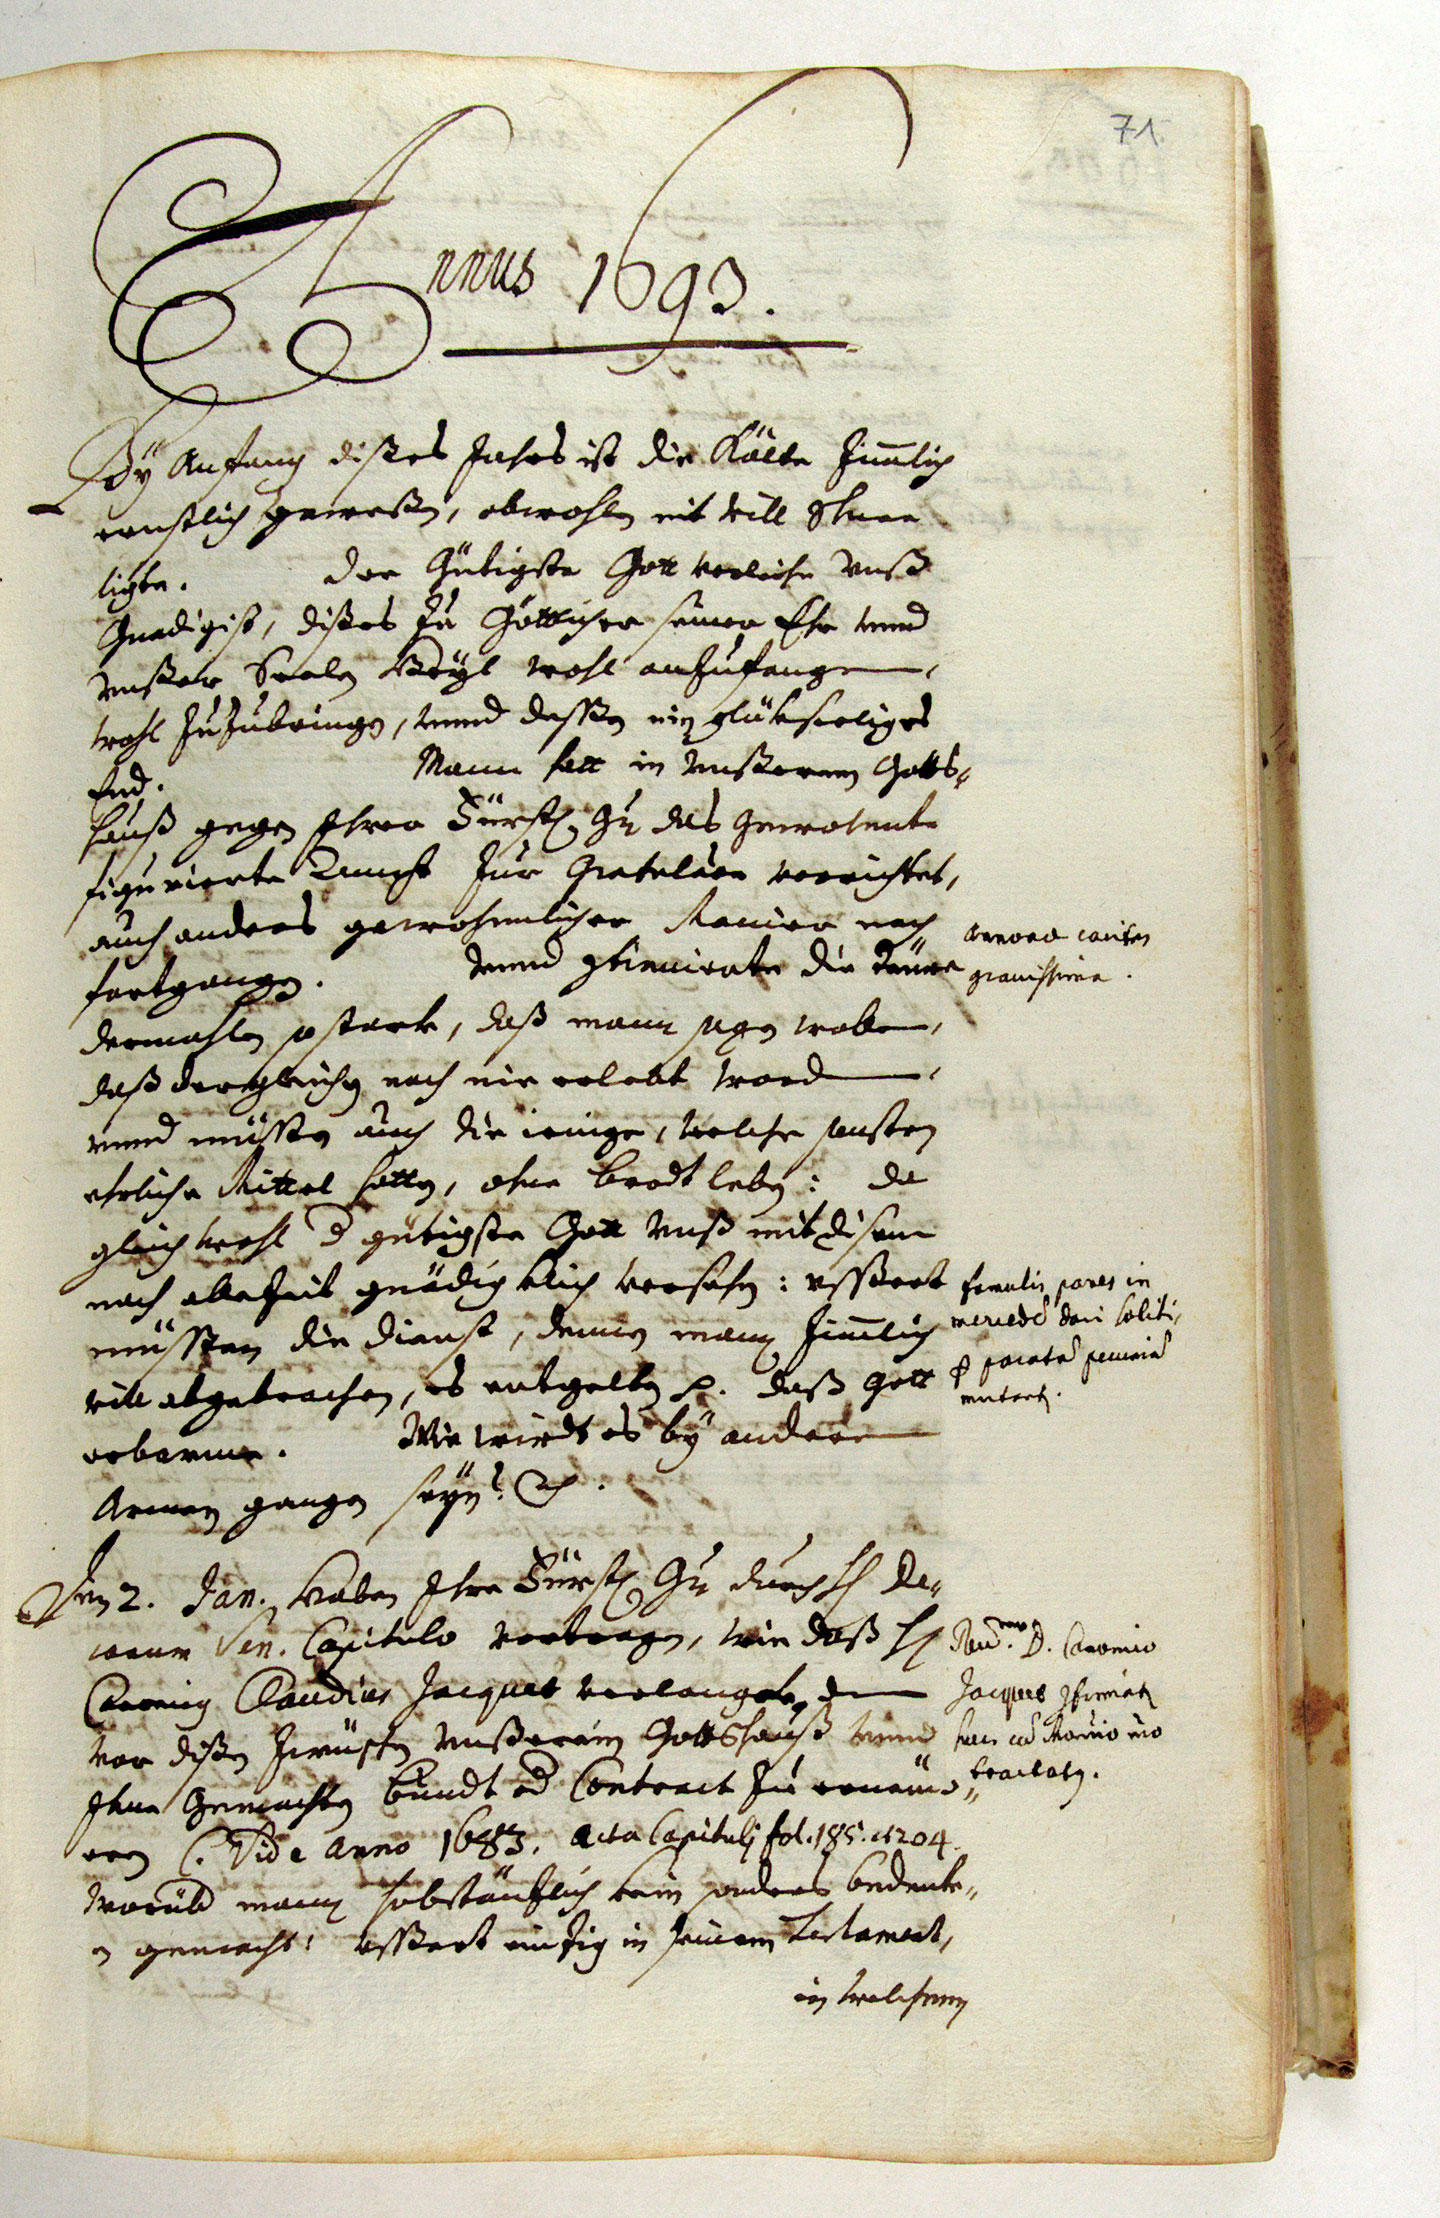 Fig. 3: Page from a weather diary from a monk in Einsiedeln, Switzerland, written at the end of the 17th century [http://creativecommons.org/licenses/by-nc-sa/2.5/ch/]. Credit: Diarium P. Josef Dietrich, Bd. 8 (1692-1694) (KAE, A.HB.8, S. 71) http://www.klosterarchiv.ch/e-archiv_archivalien.php